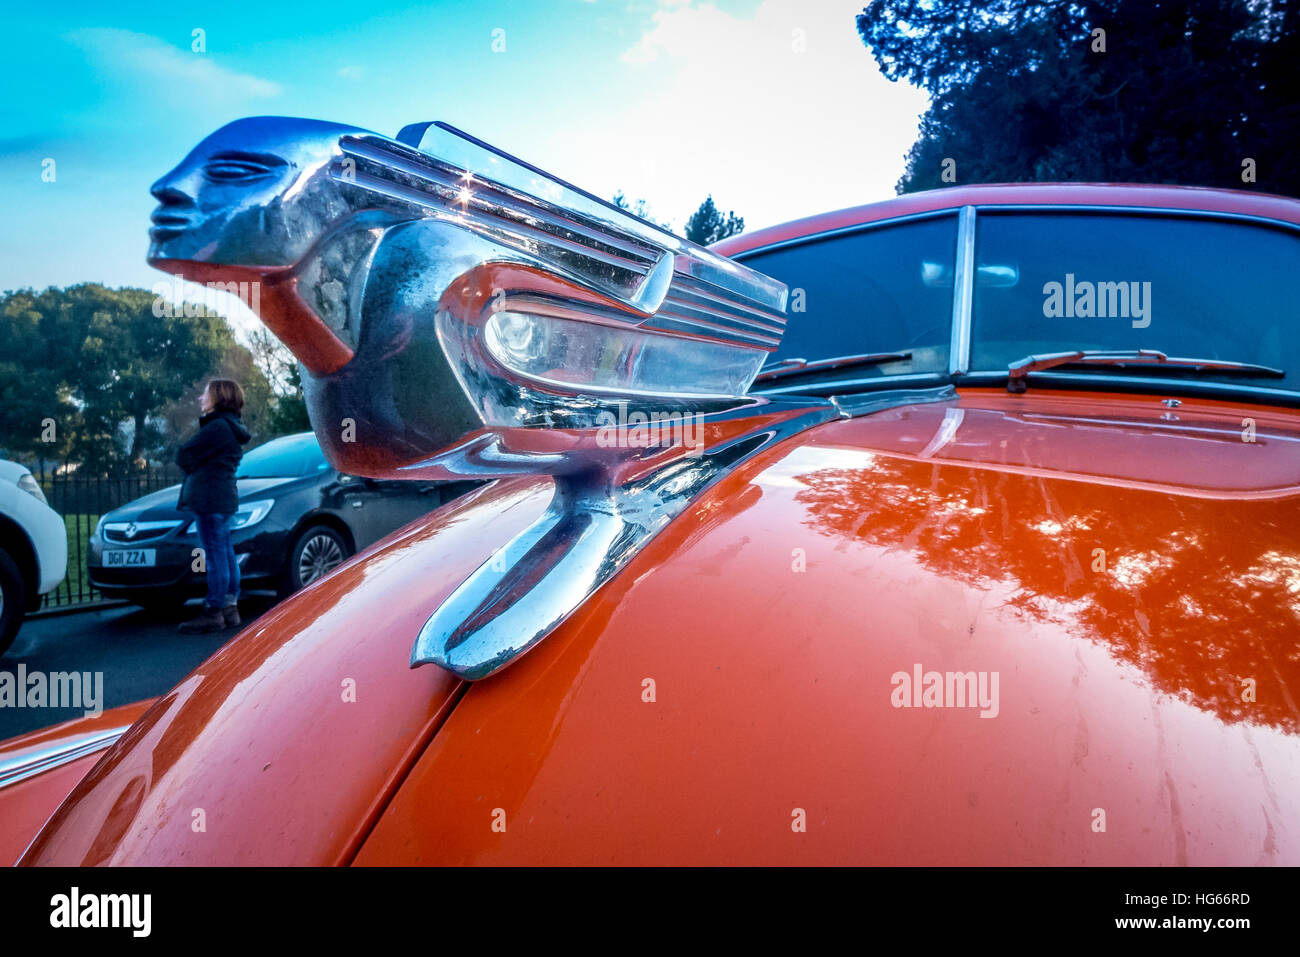 Chevrolet's Flying Lady hood accessory on a vintage Chevy Stock Photo